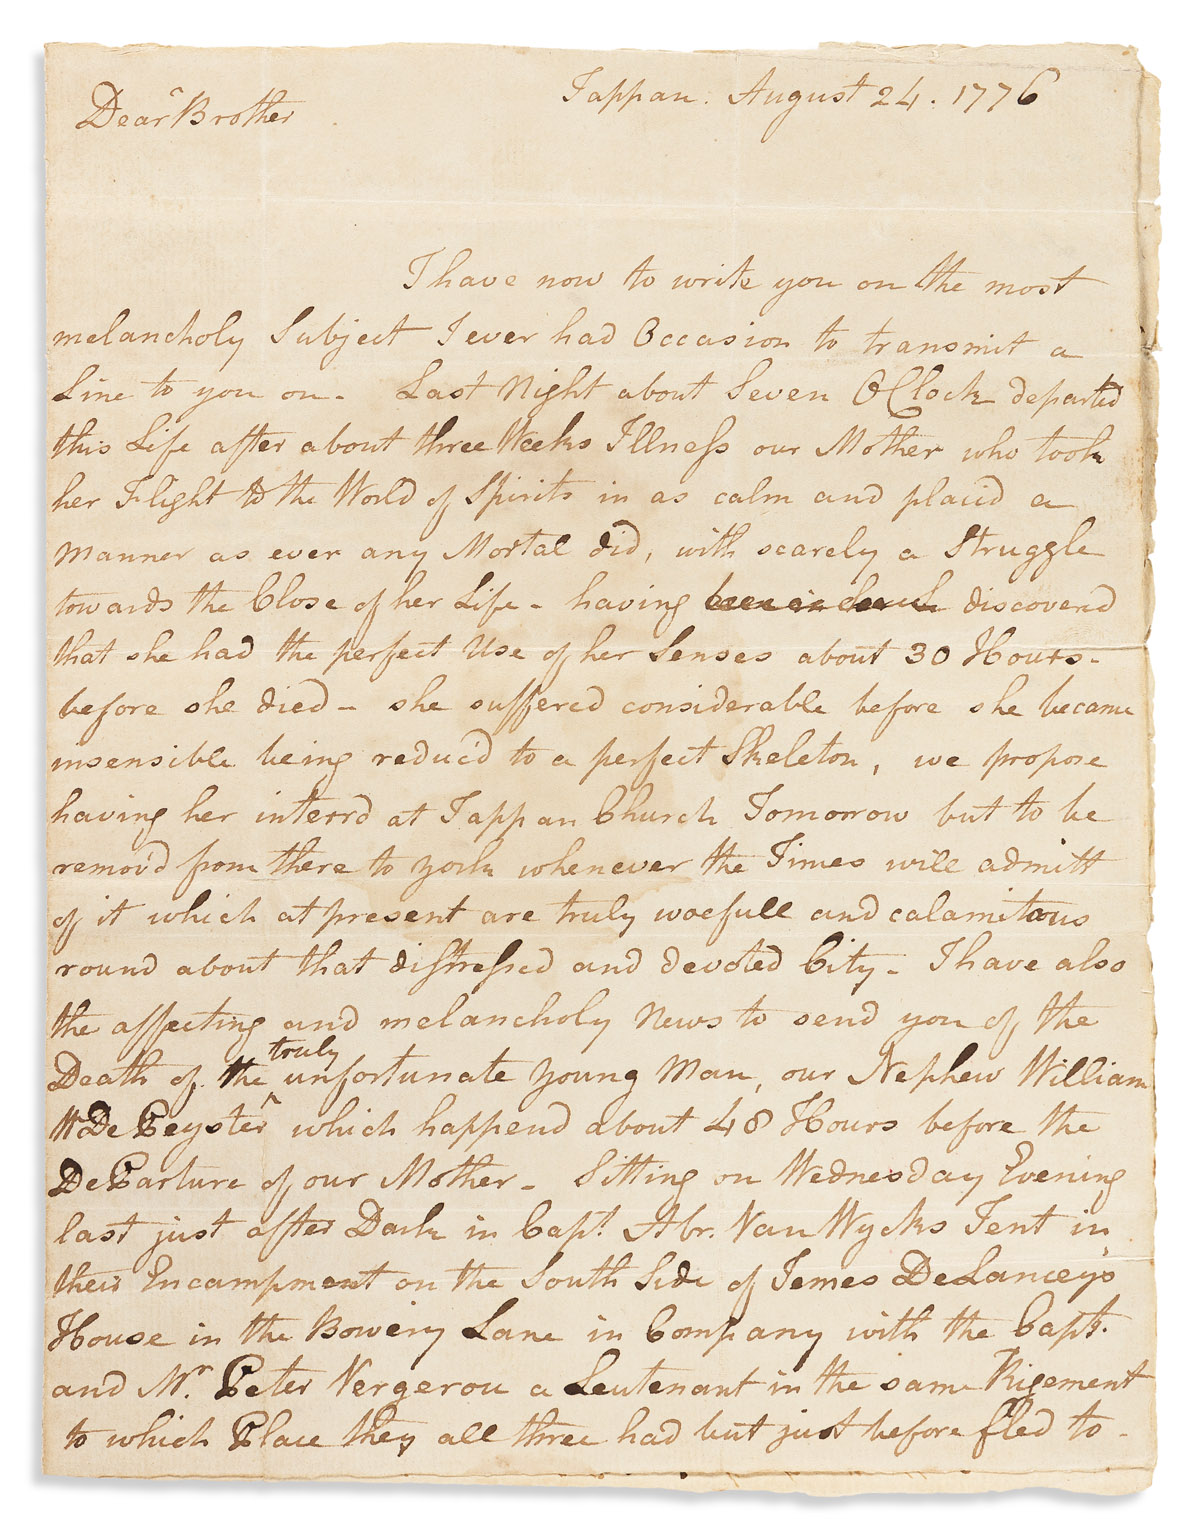 (AMERICAN REVOLUTION--1776.) Abraham W. de Peyster. Letter describing the deadly lightning storm just before the Battle of Long Island.